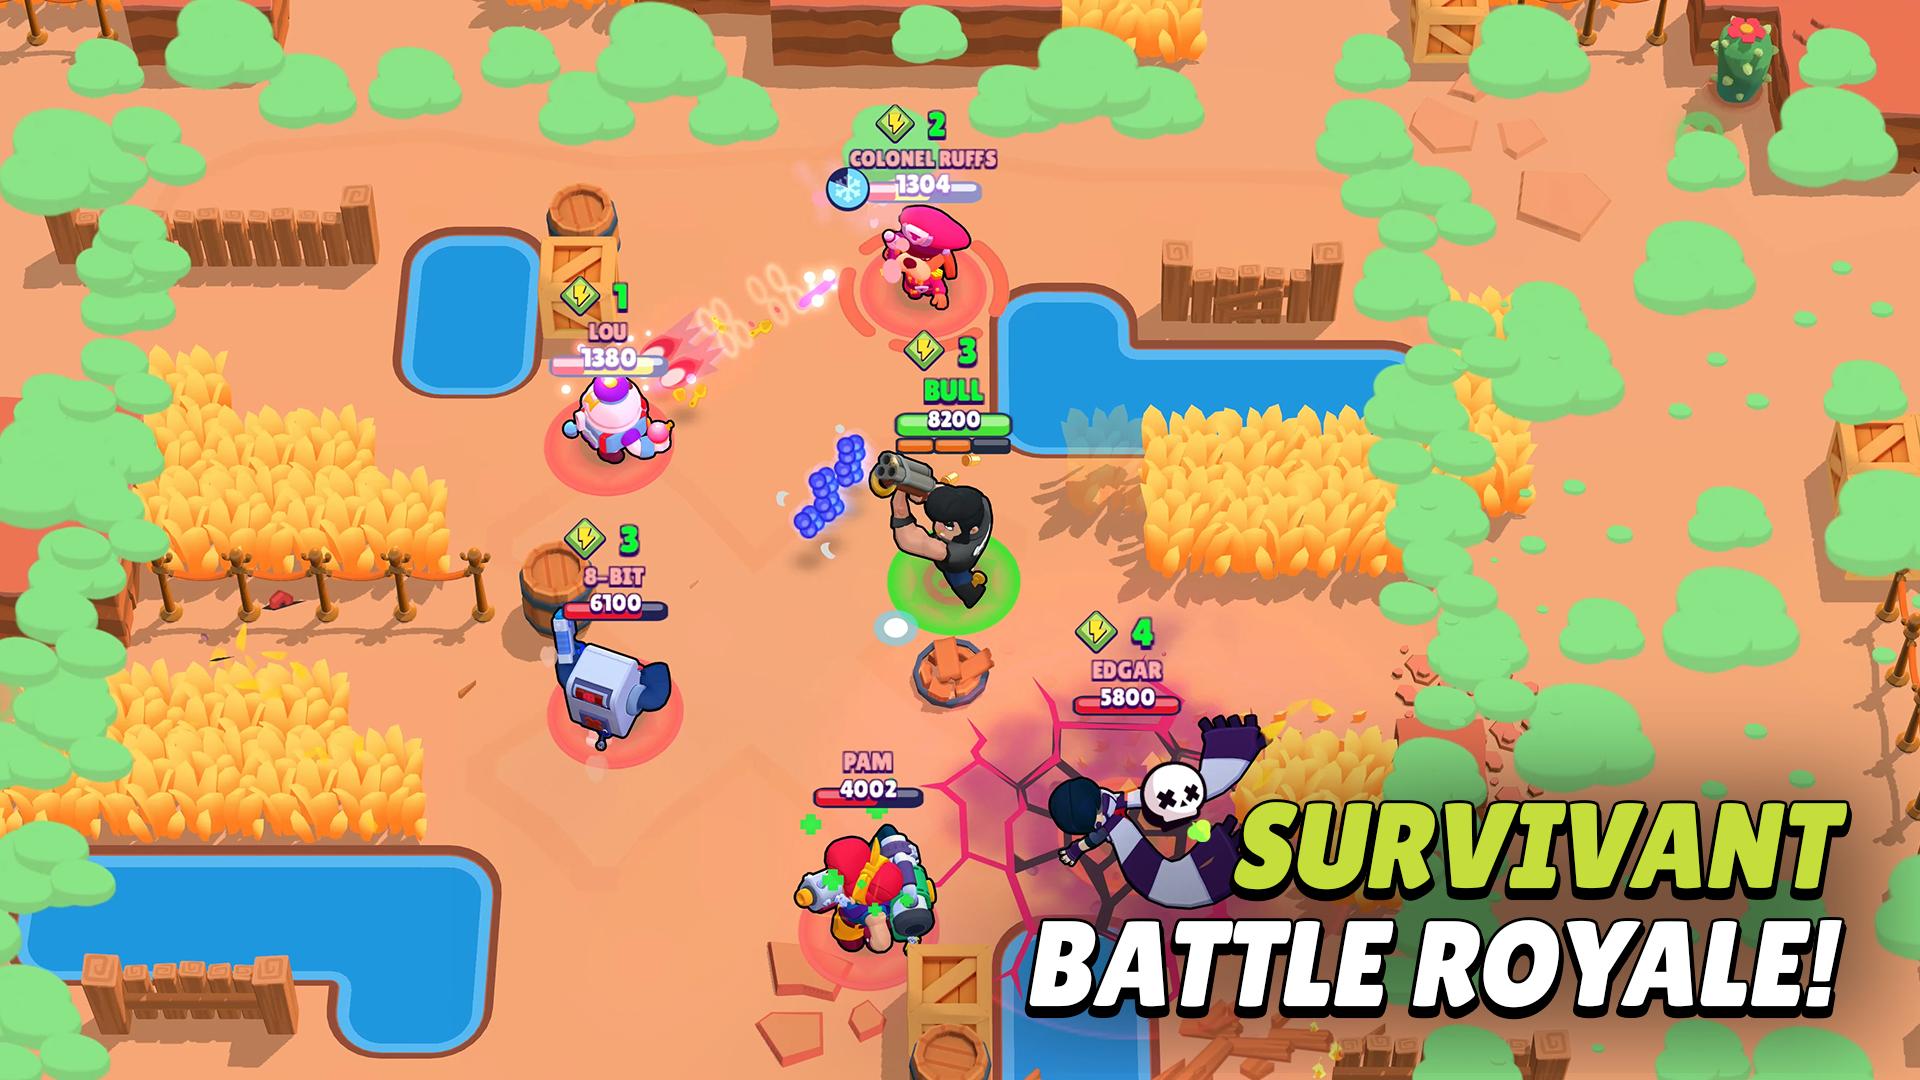 Brawl Stars Apk Download Pick Up Your Hero Characters In 3v3 Smash And Grab Mode Brock Shelly Jessie And Barley - pouvoirs stars prevu semaine 32 brawl star